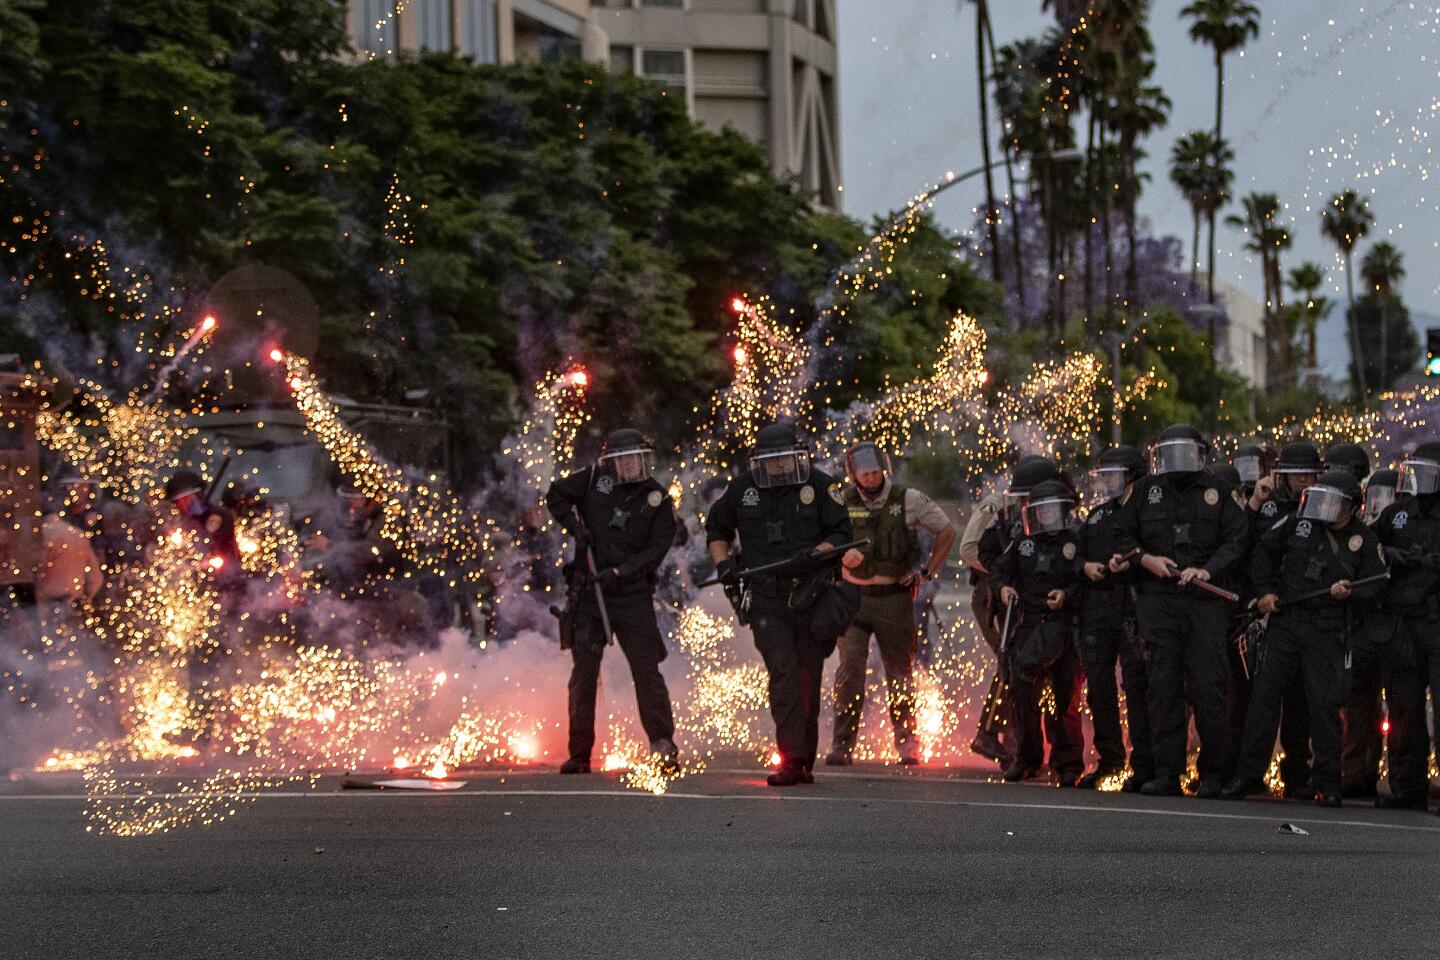 Fireworks thrown by a protester explode at the feet of Riverside police.